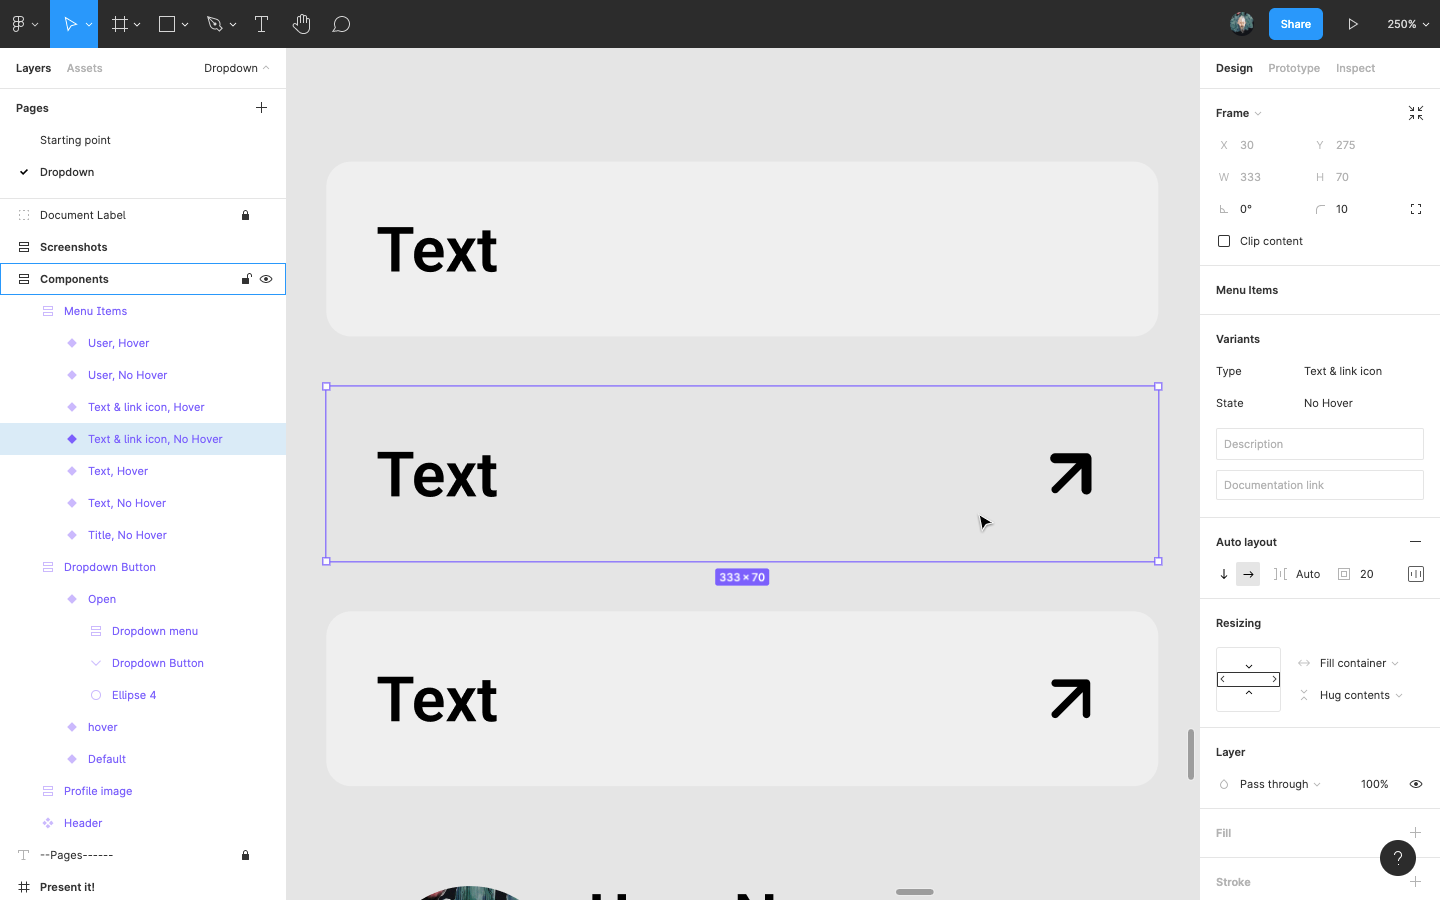 Create a text & link icon variant